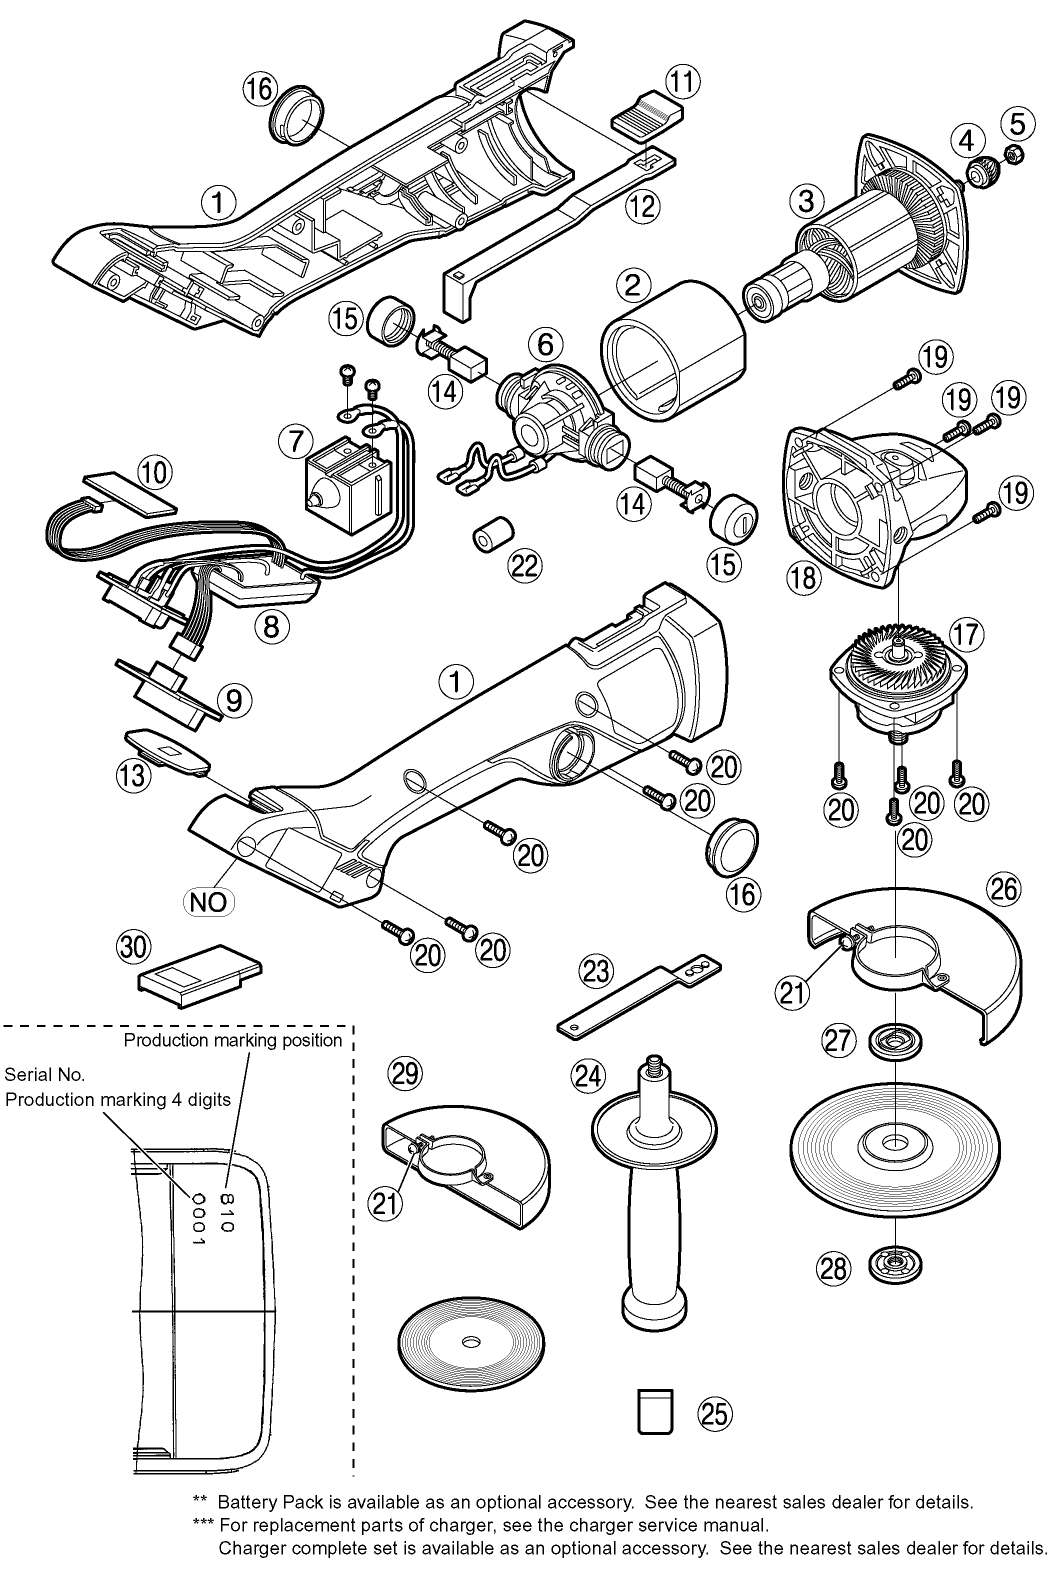 EY4640: Exploded View